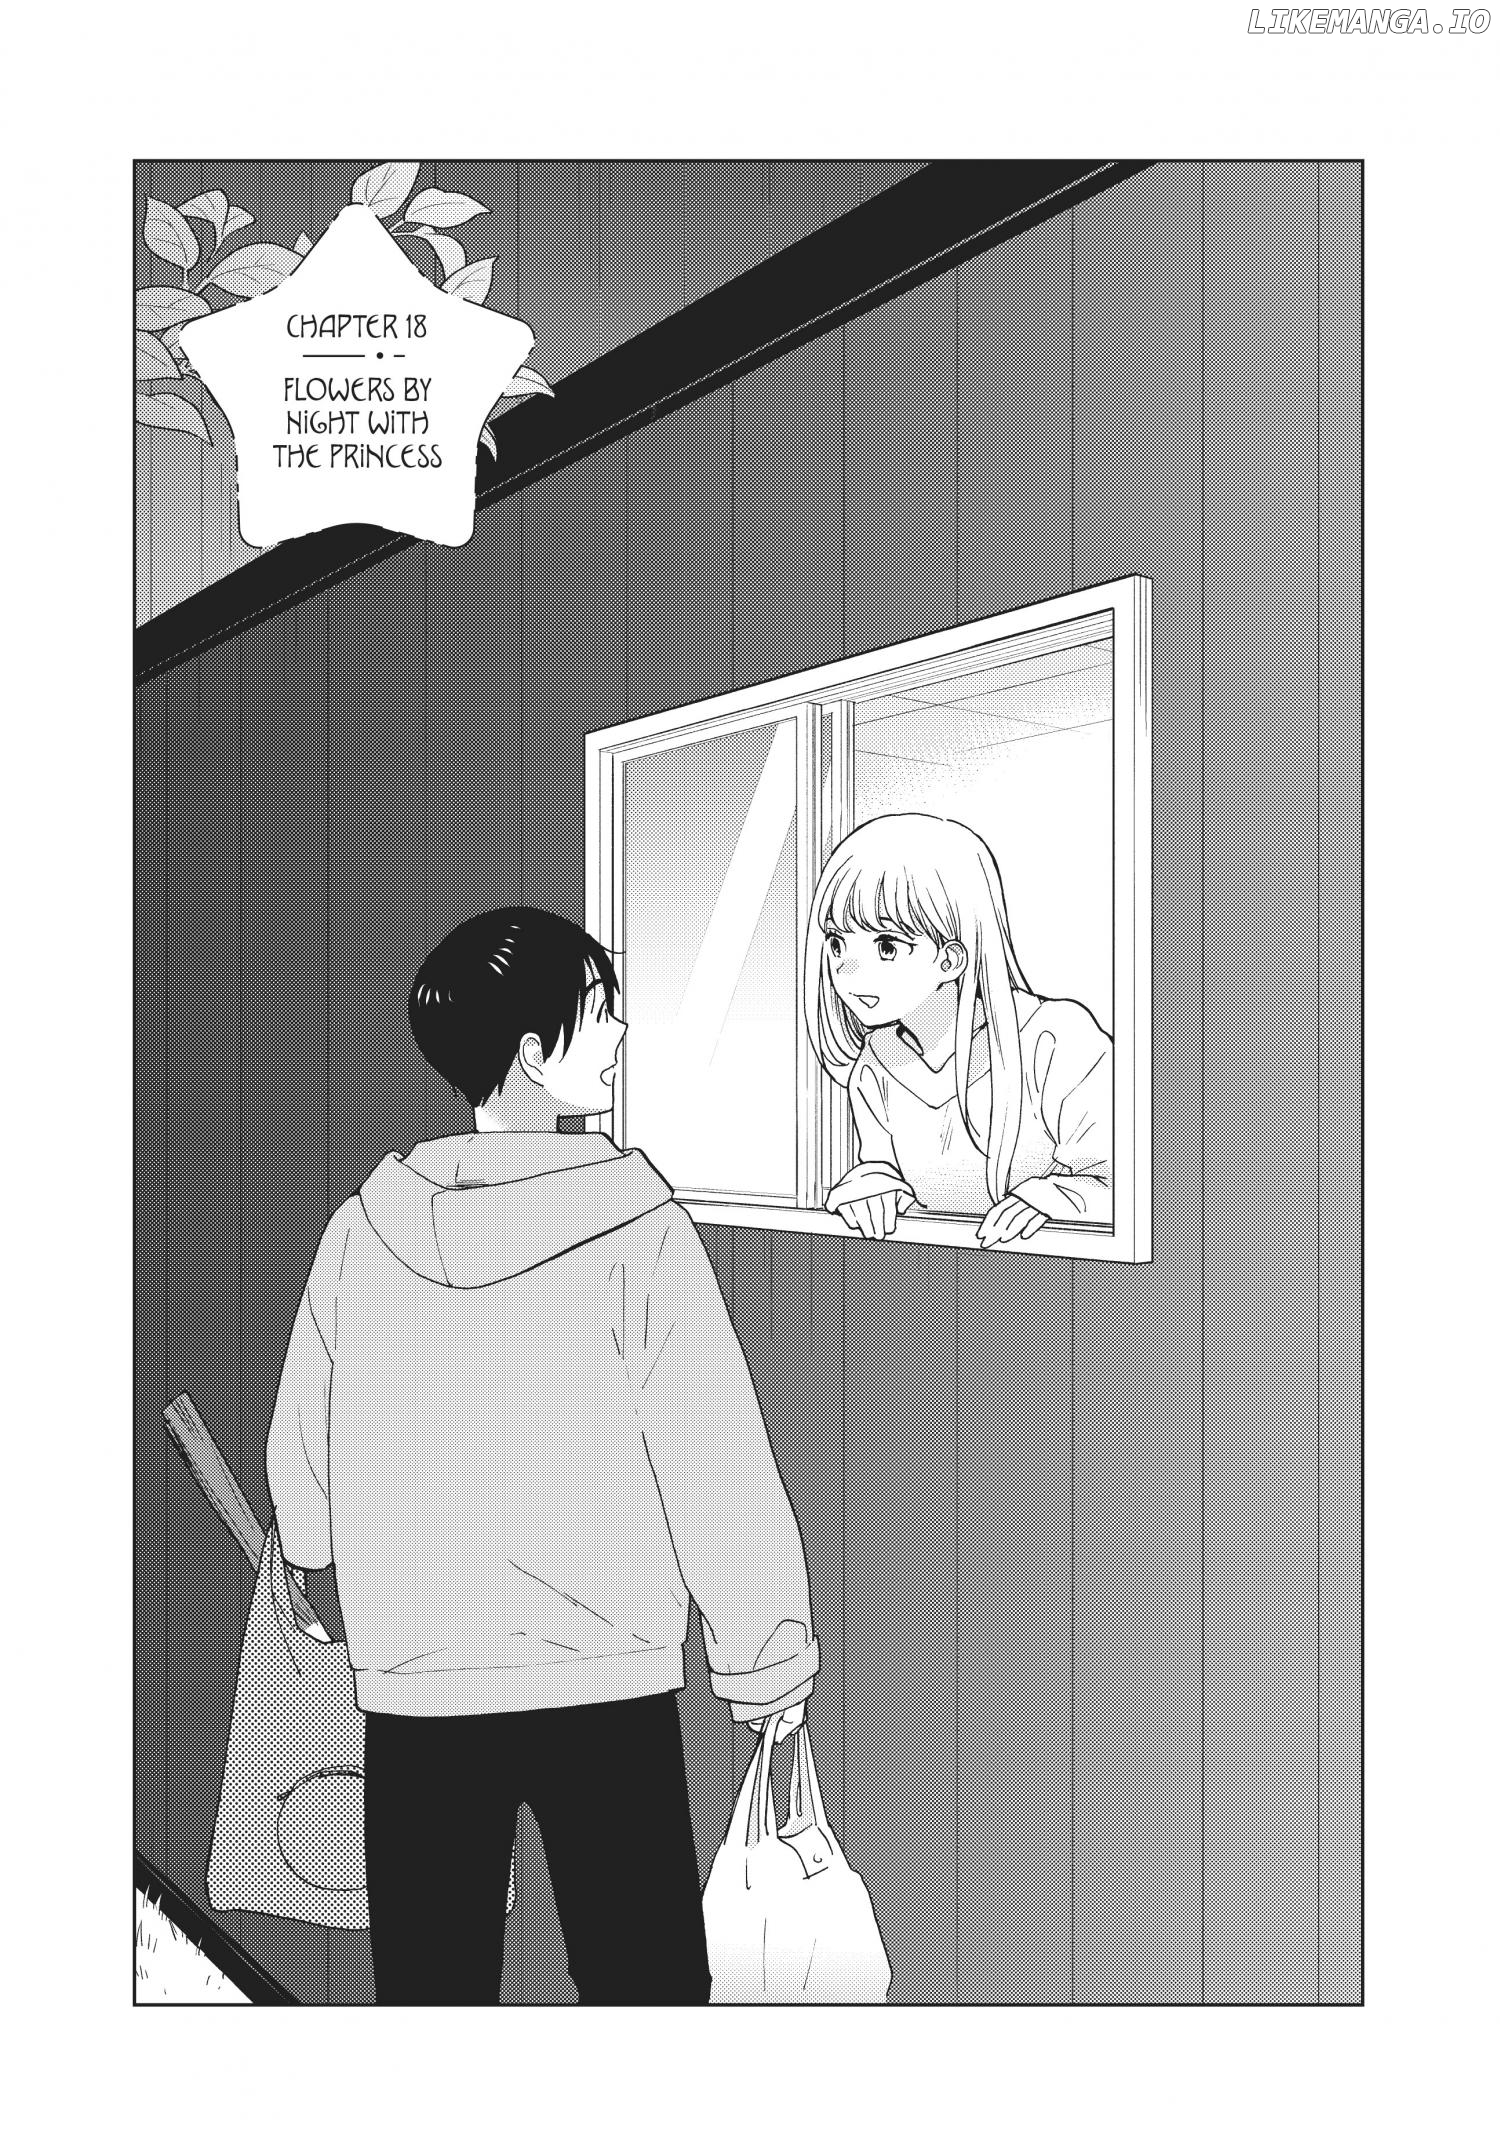 The Galaxy Next Door chapter 18 - page 1